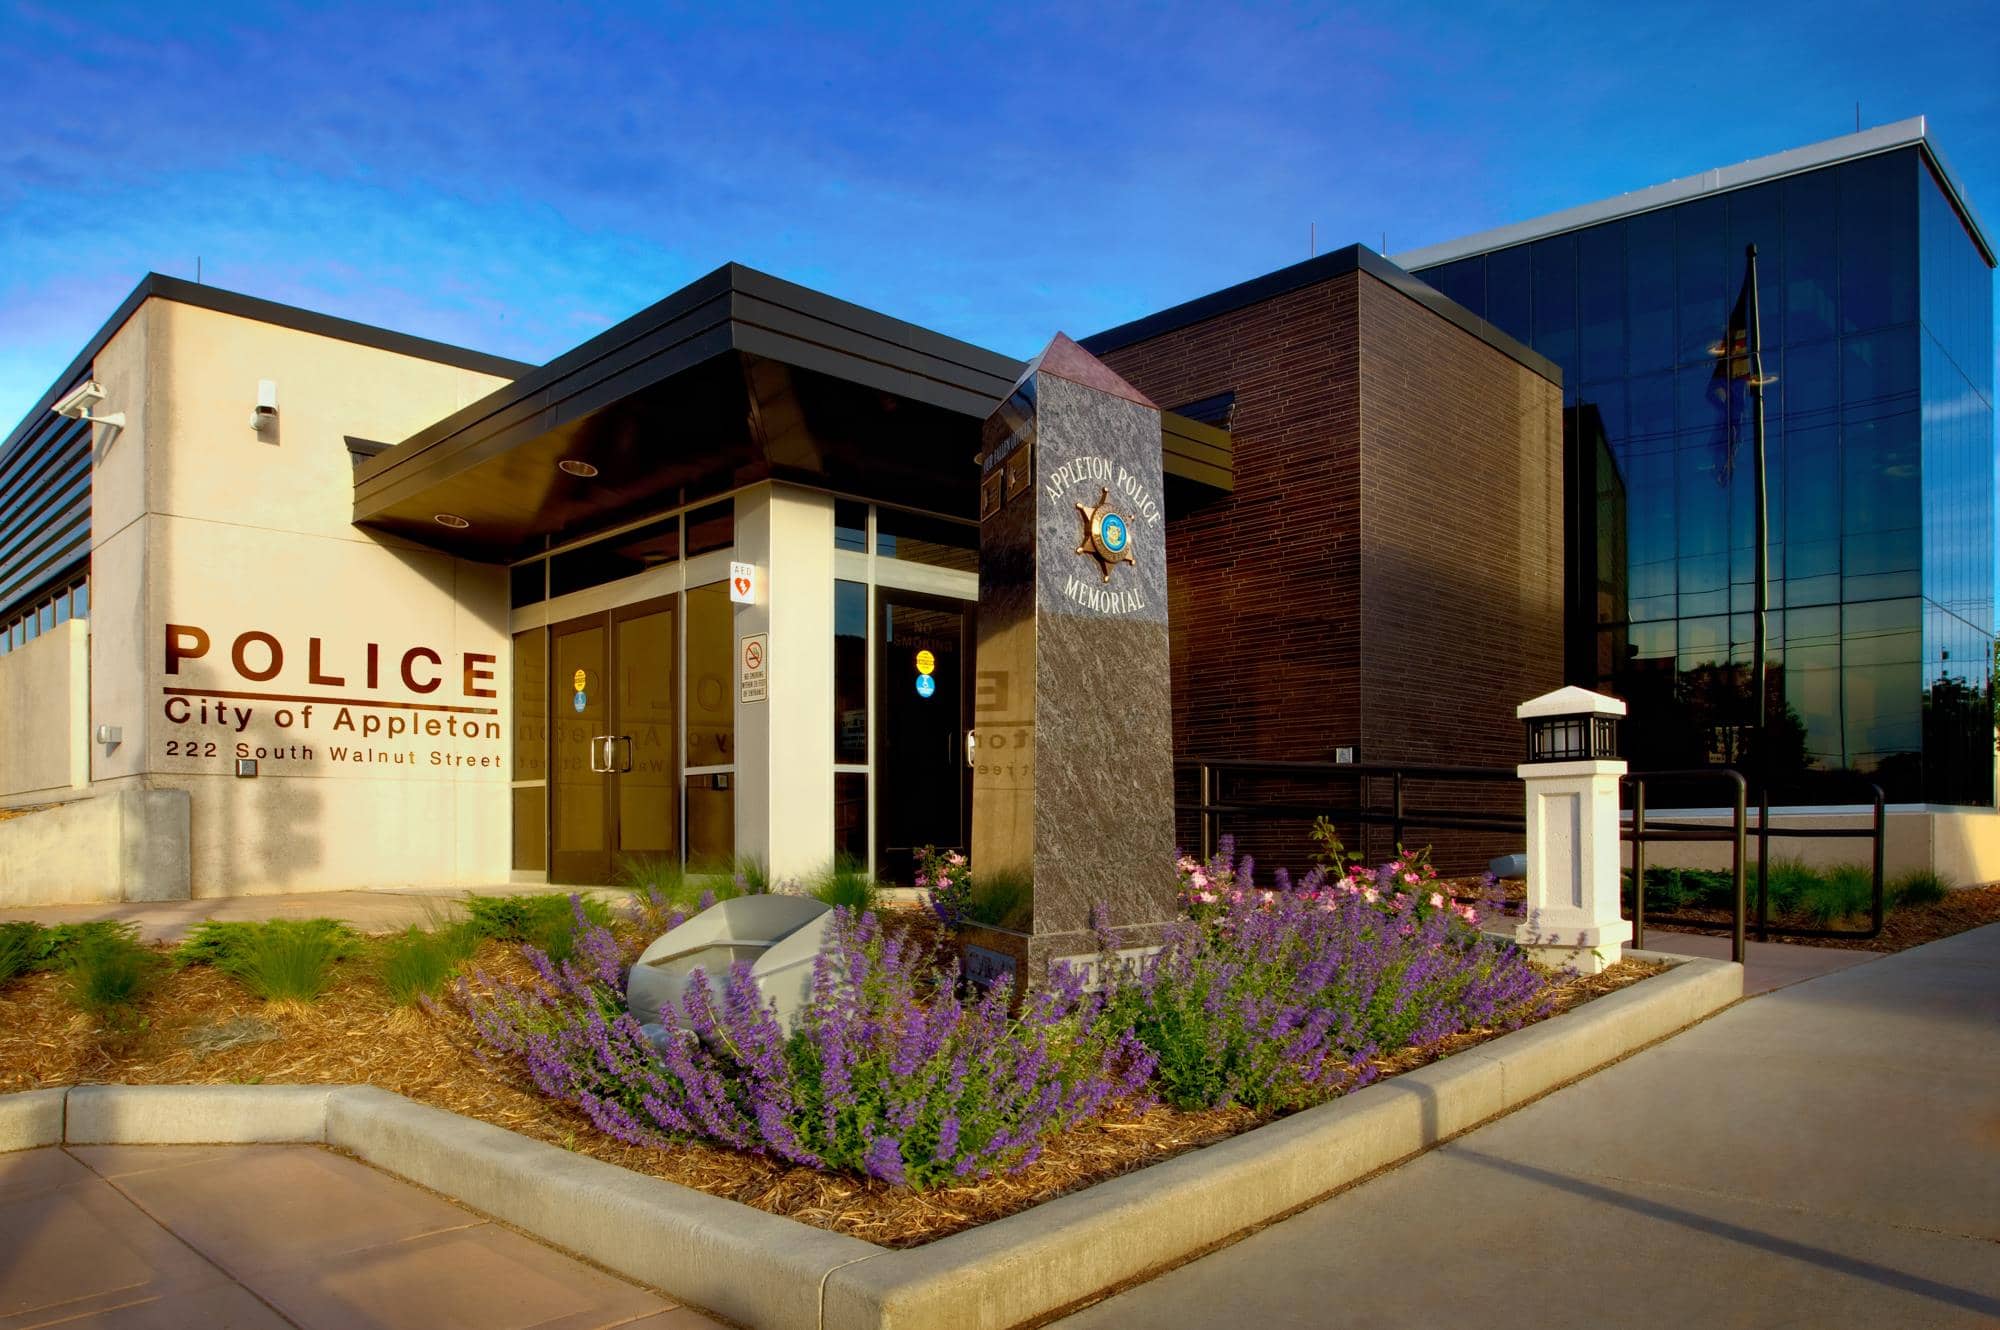 Image of City of Appleton Police Department